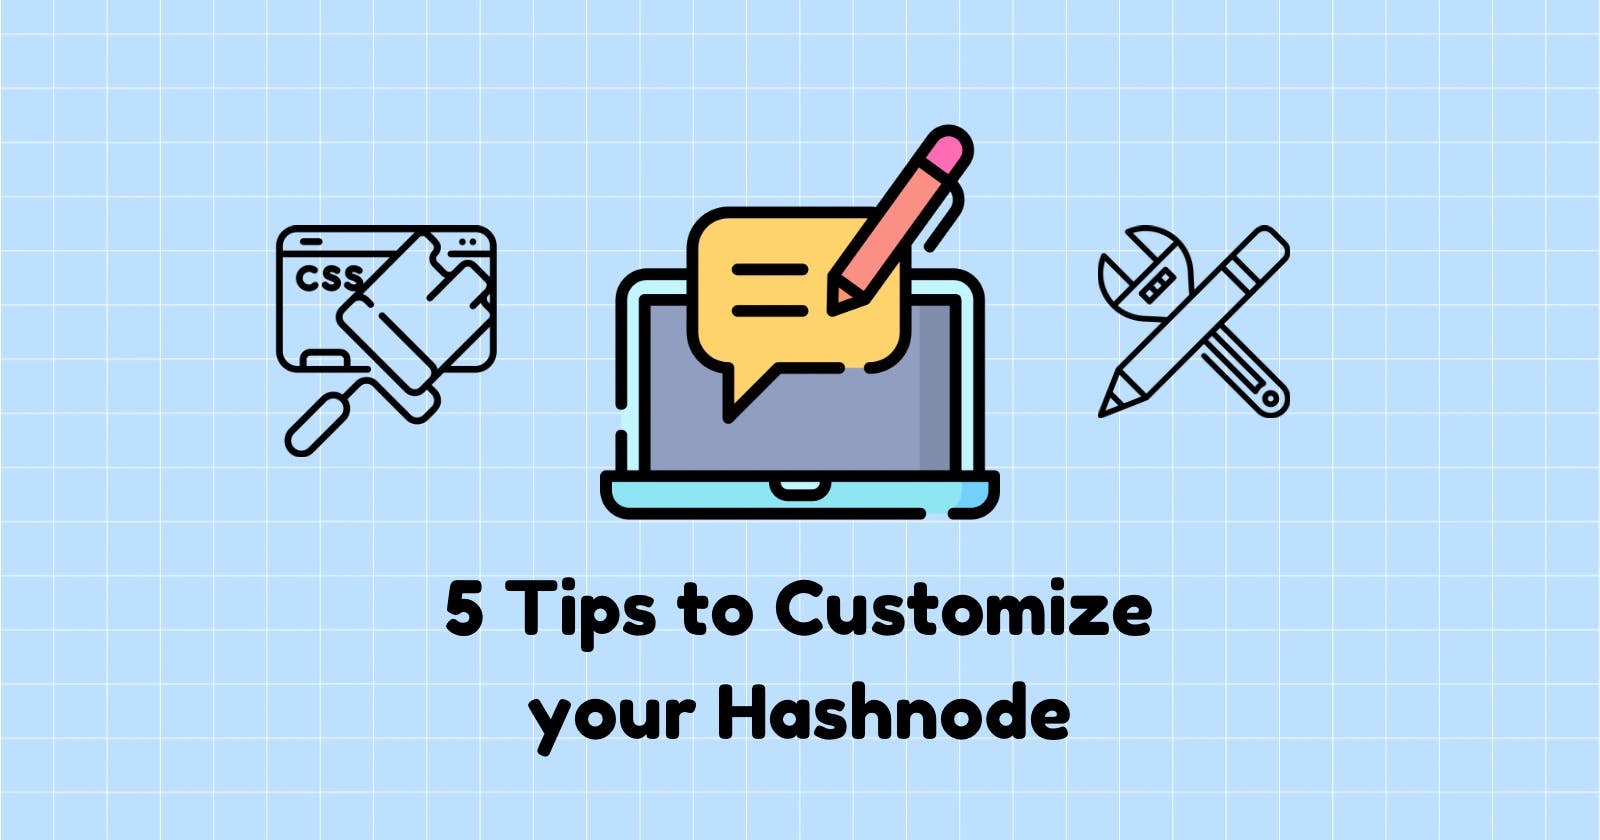 5 Simple Tips to Make Your Hashnode Feel More Professional